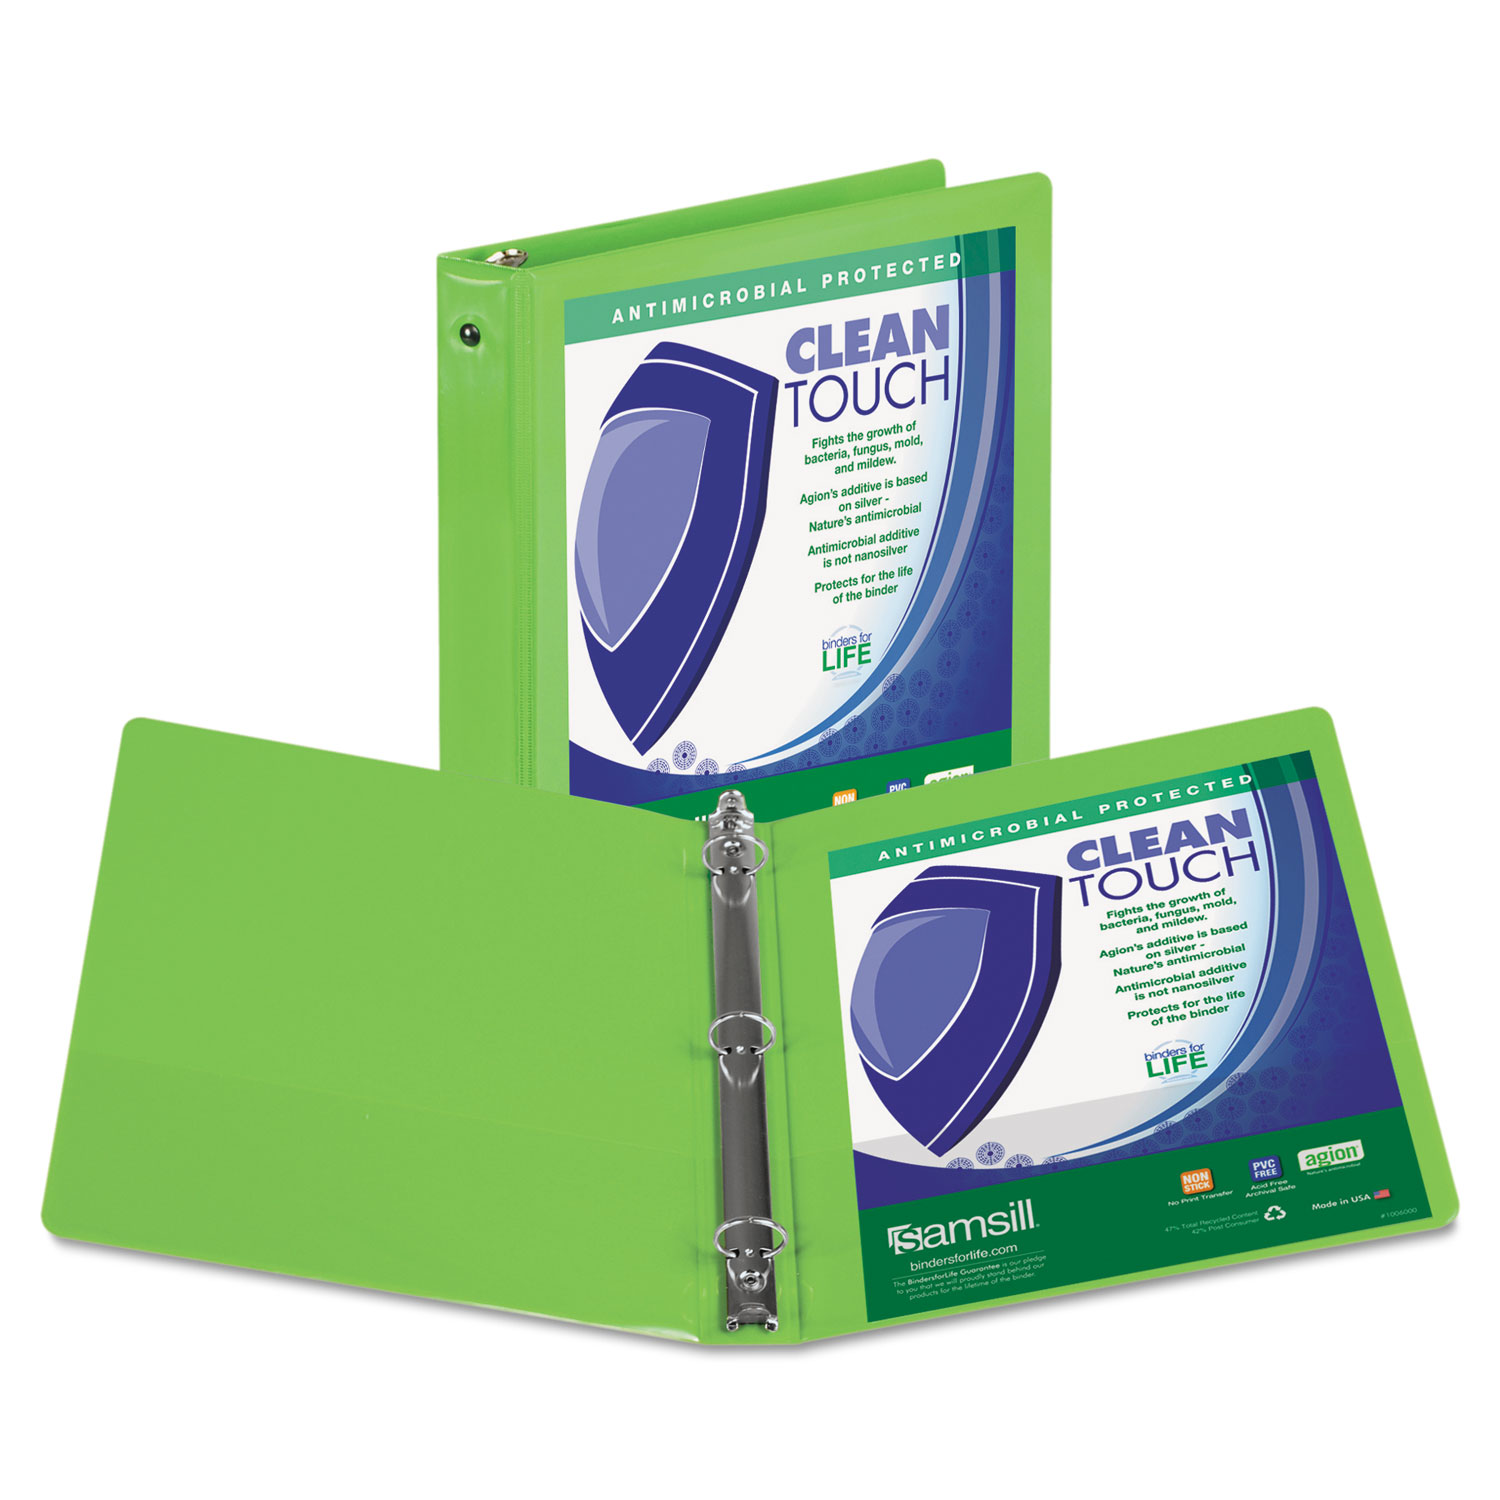 Clean Touch Round Ring View Binder, Antimicrobial, 4, Lime